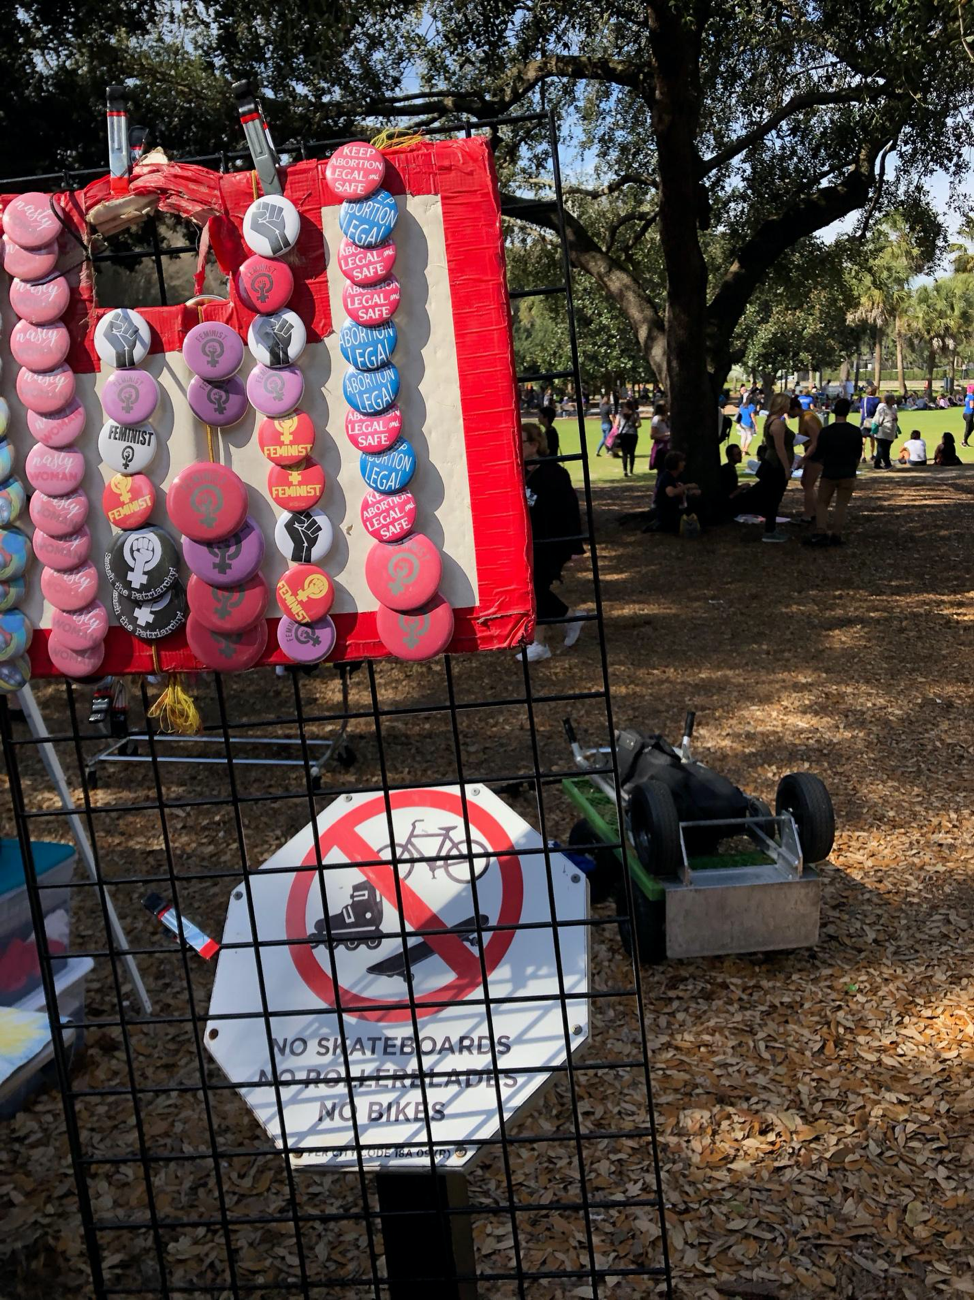 Figure 5. Image showing buttons for legalizing abortion sold at Lake Eola Park on Jan. 19, 2019.